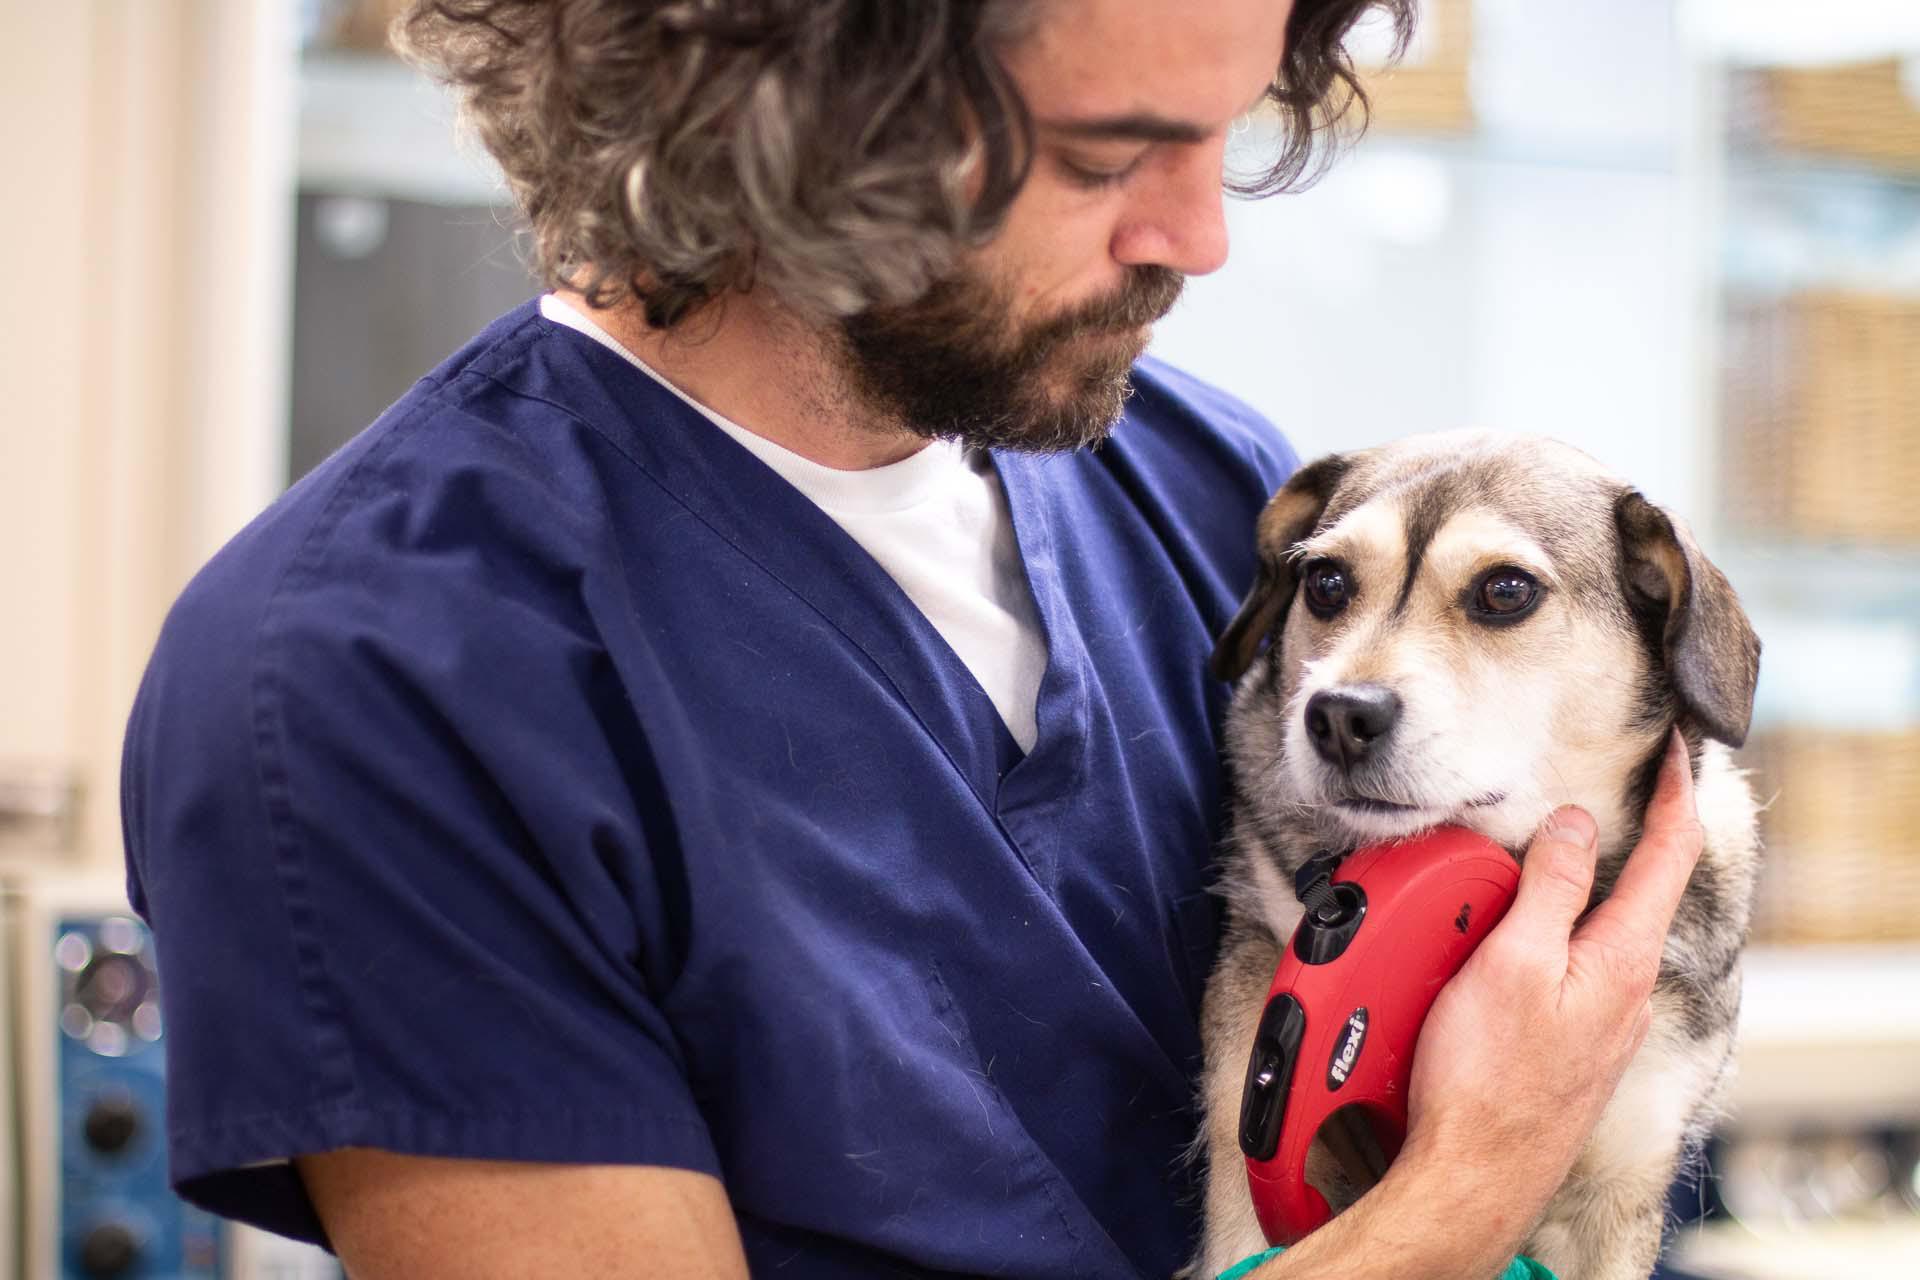 Our technicians are trained to hold our patients so that pet's feel as safe and comfortable as possible.